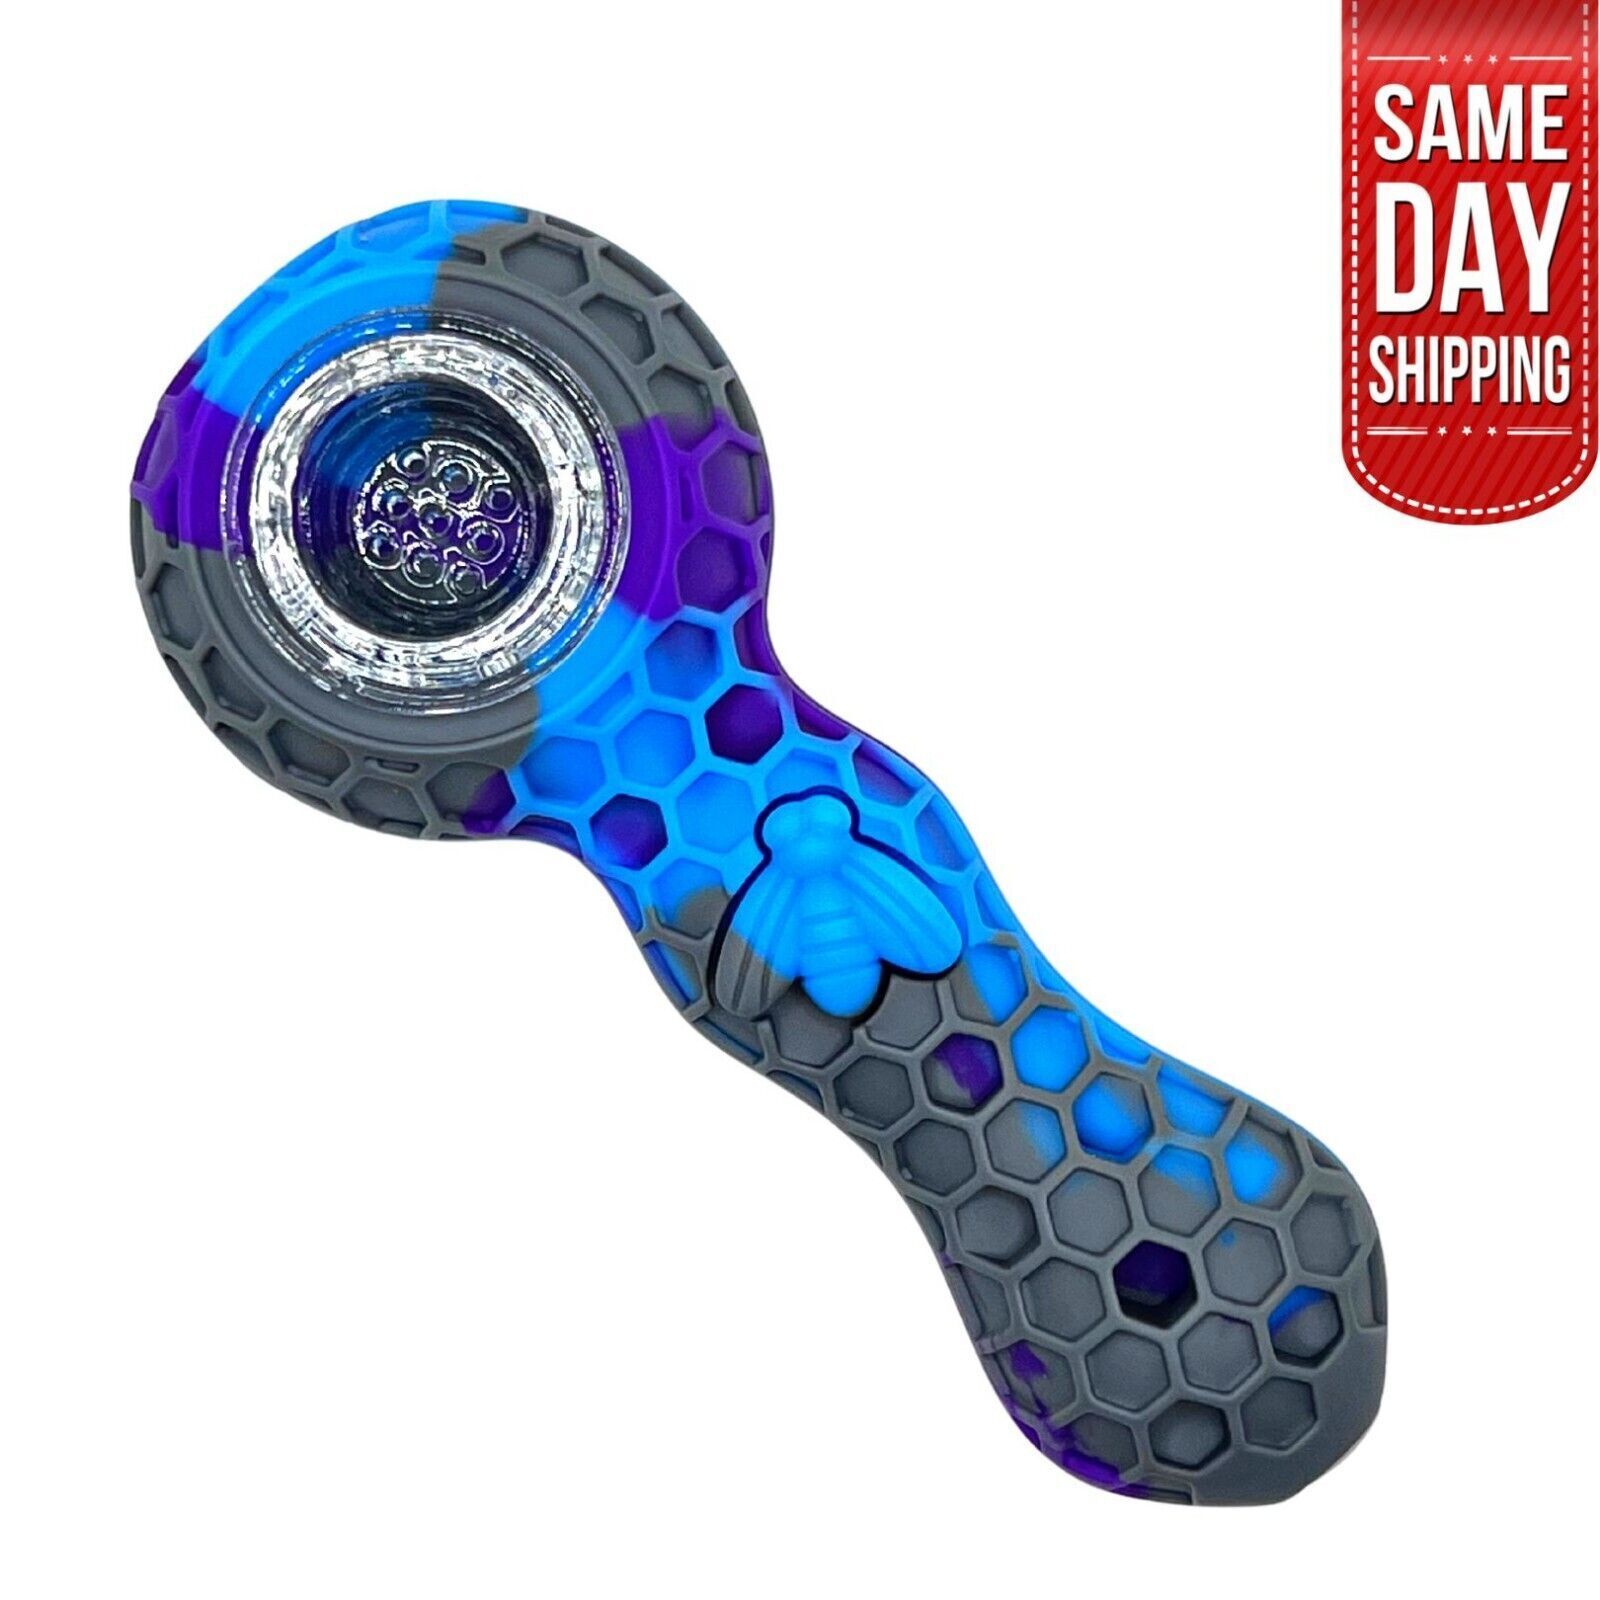 Unbreakable Silicone Honeycomb Tobacco Smoking Pipe With Glass Bowl Purple/Blue